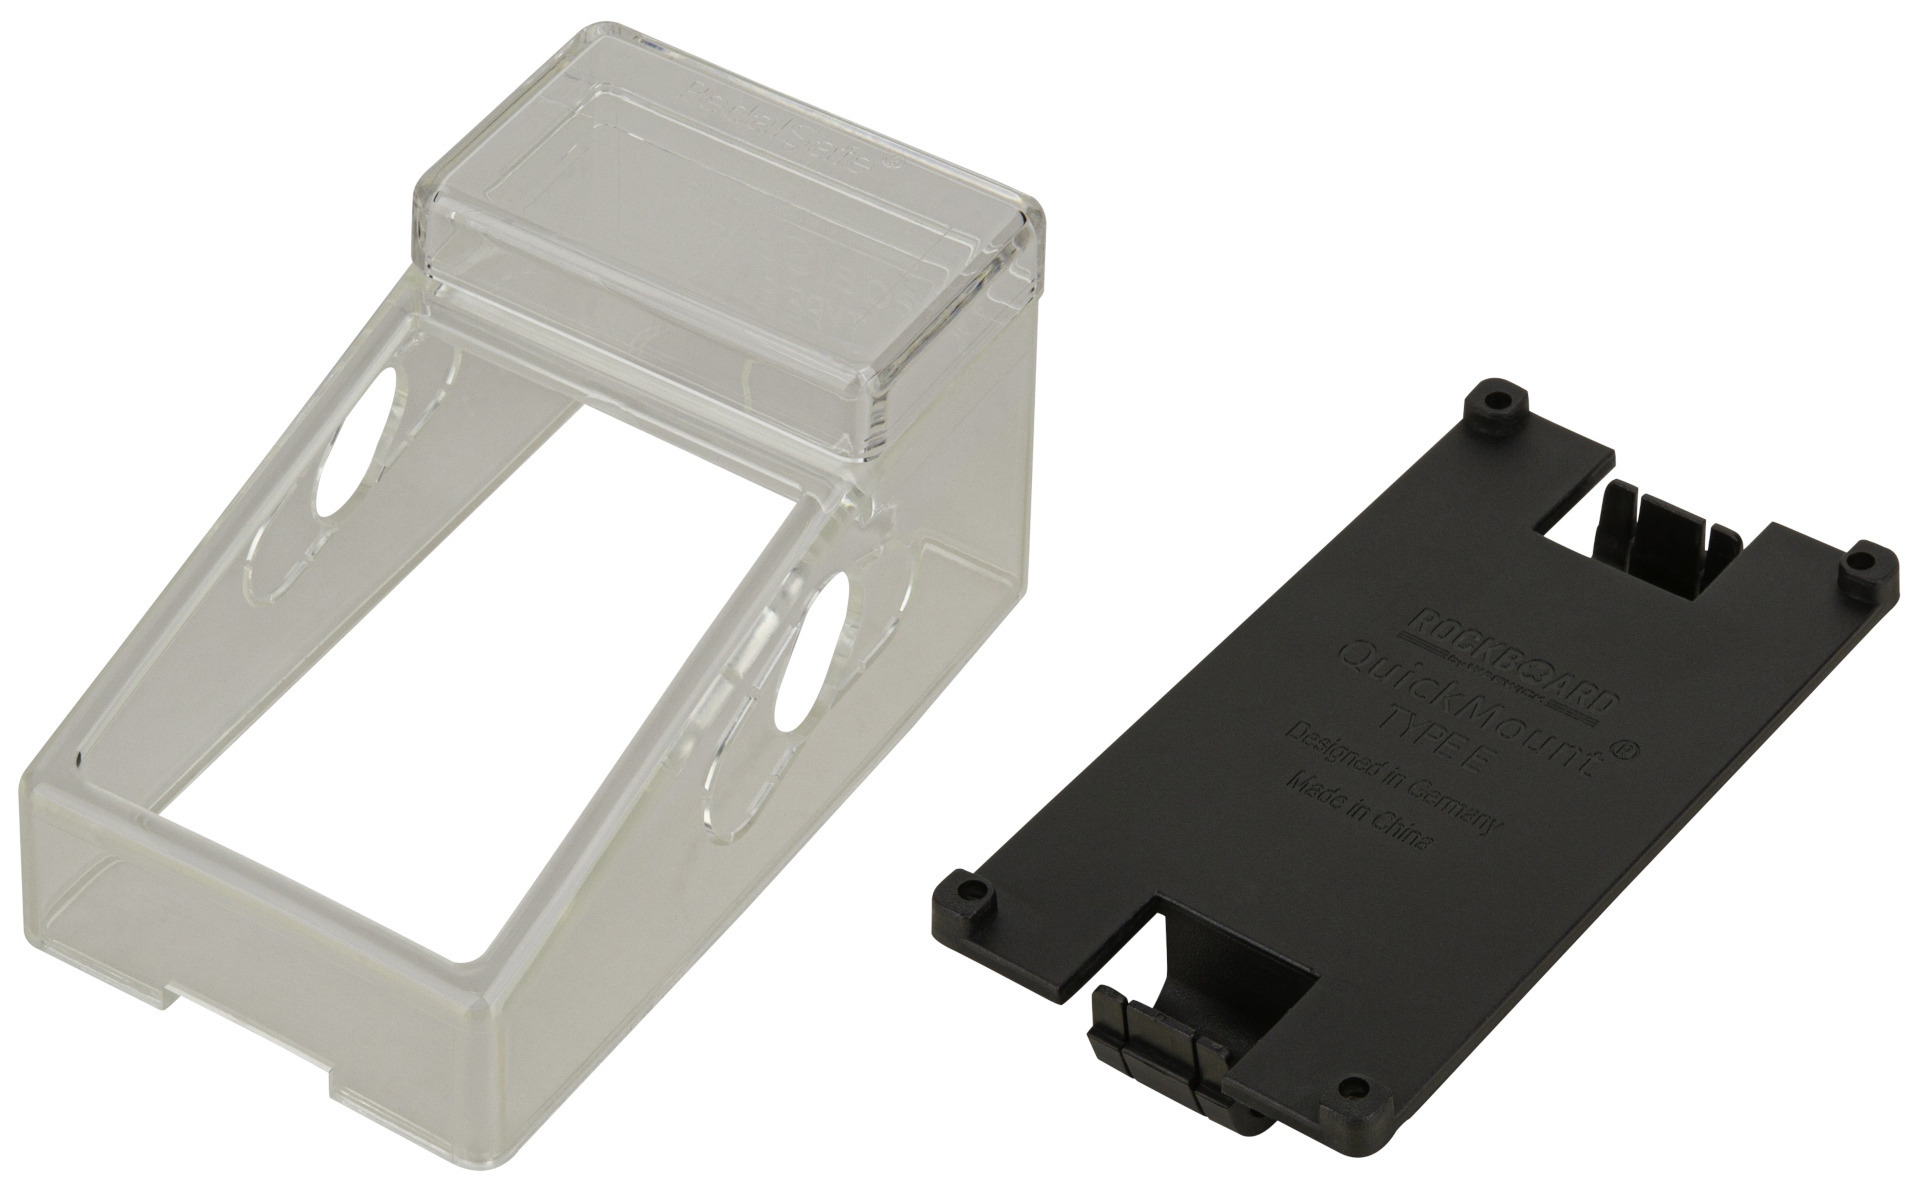 RockBoard PedalSafe Type E - Protective Cover And RockBoard Mounting Plate For Standard Boss Pedals